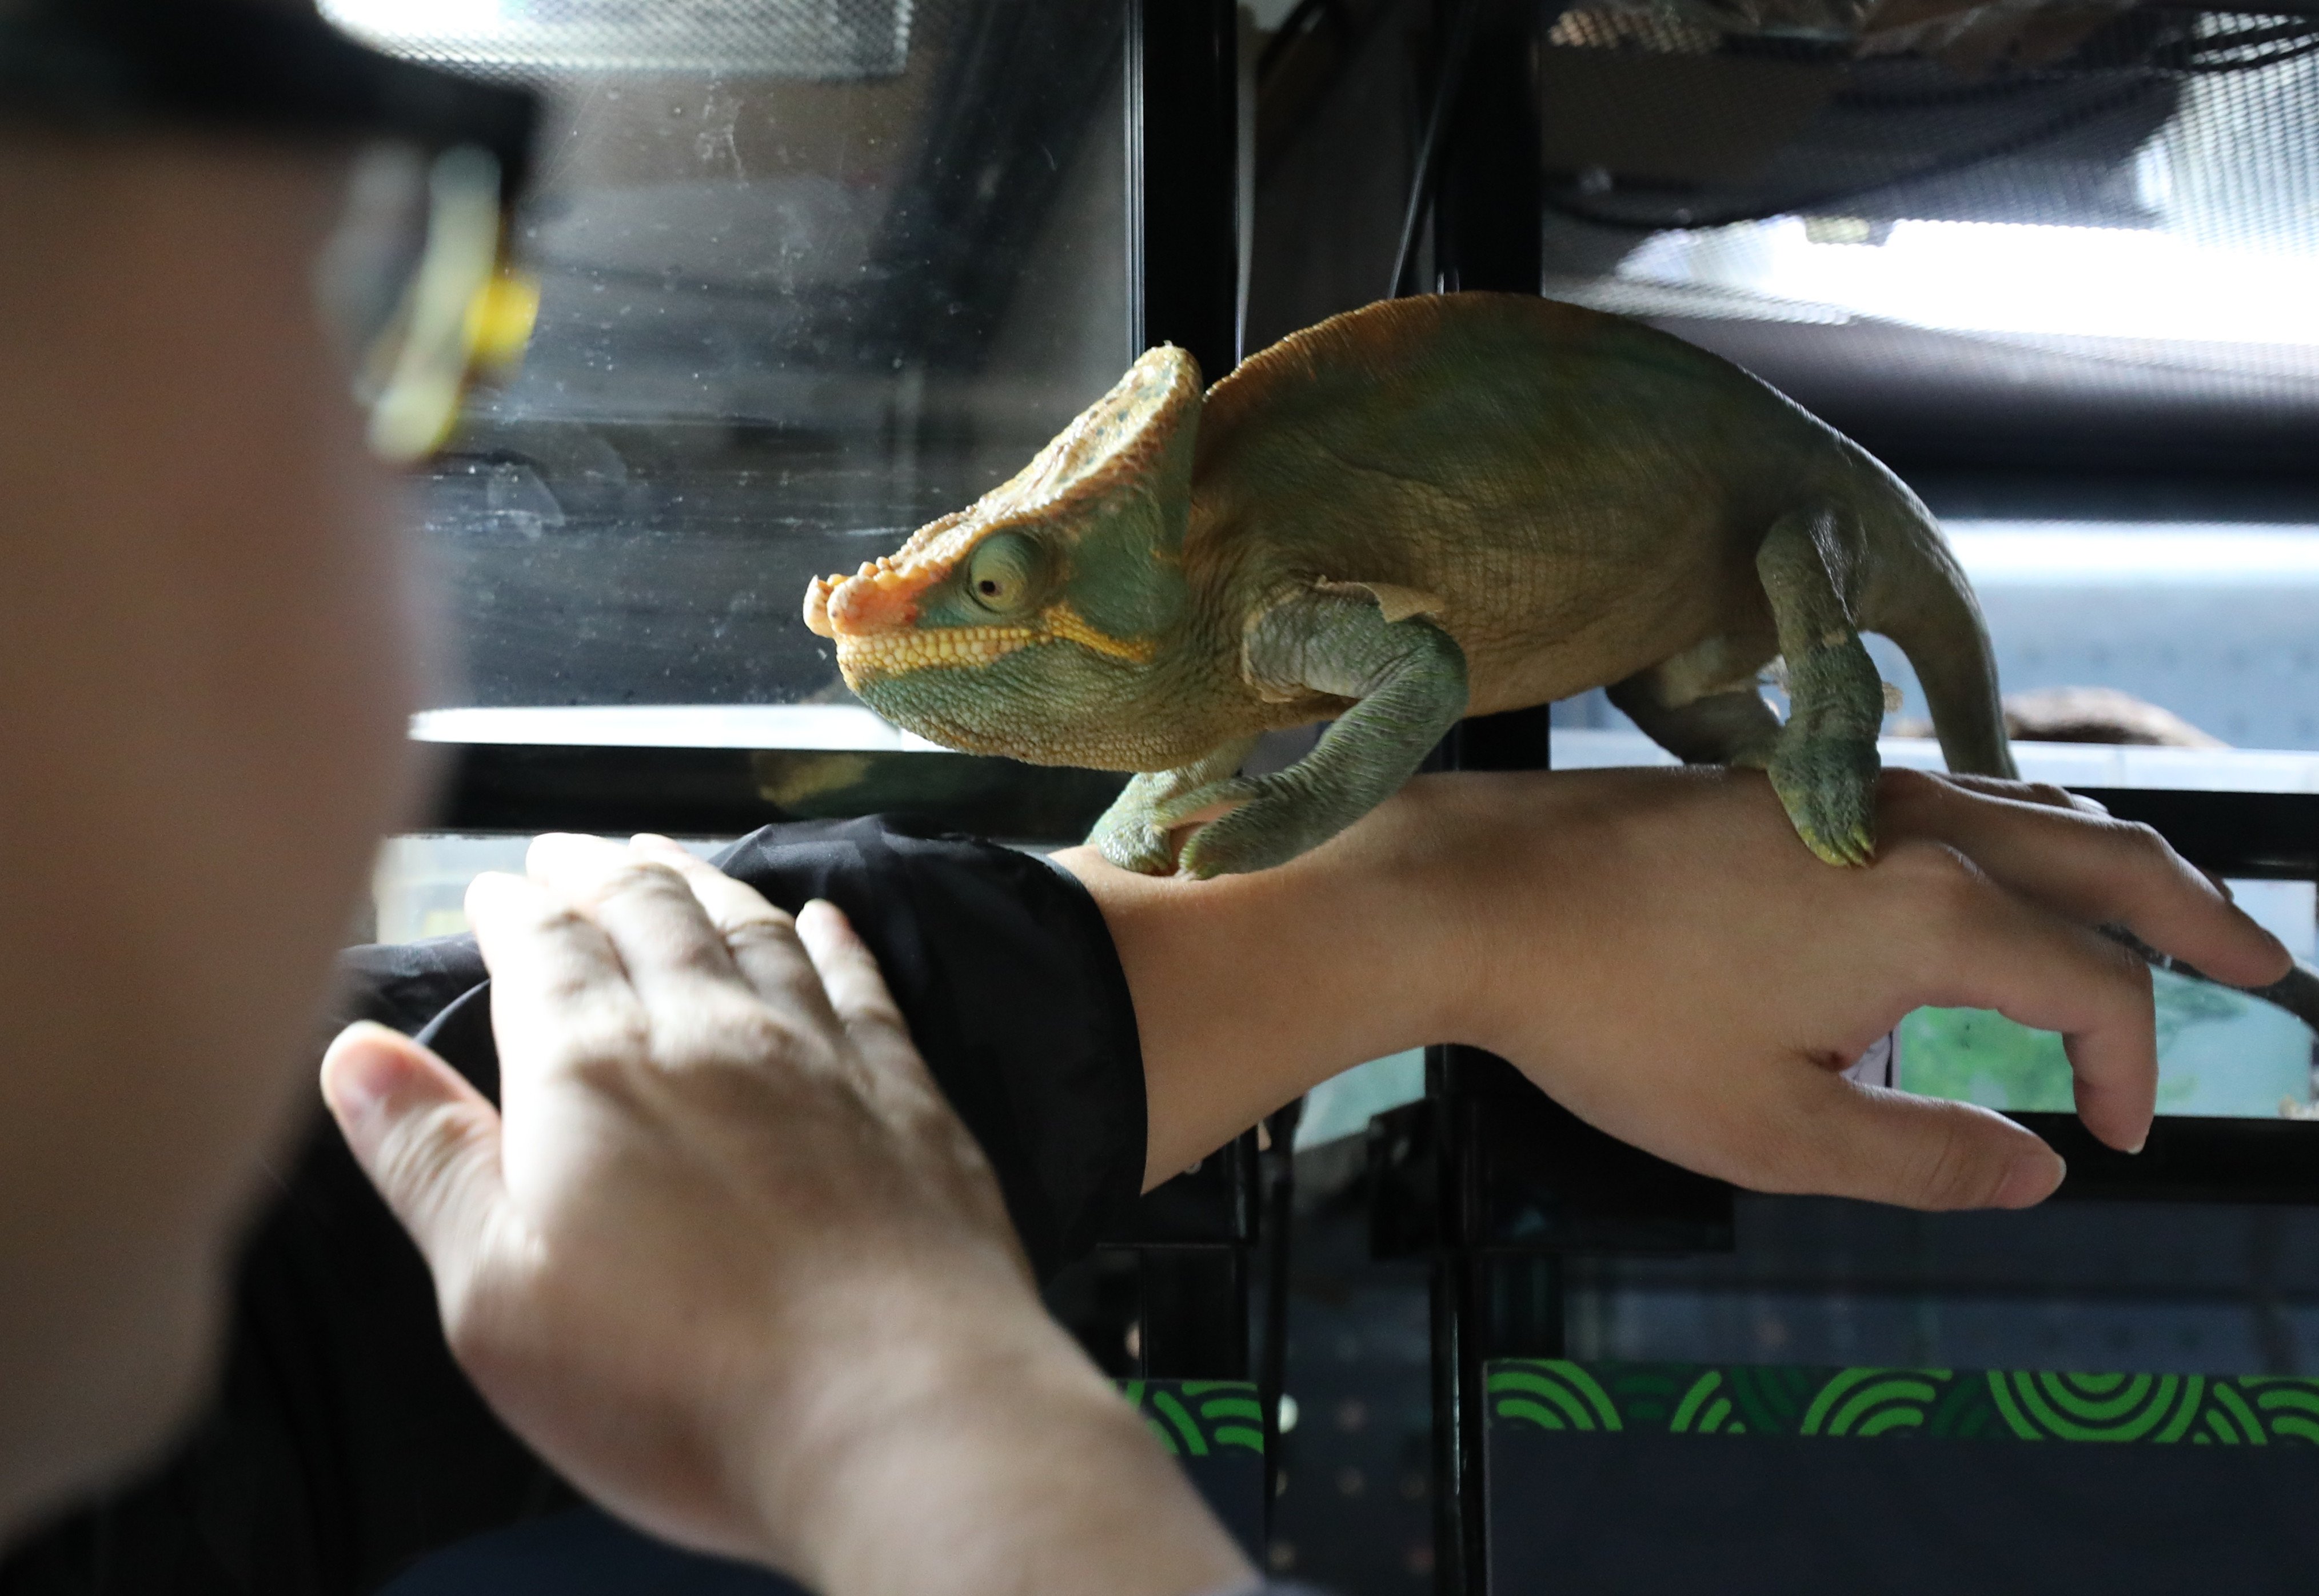 Reptiles such as chamelons, here at Mong Kok store FishManShop, could be bought as Year of the Dragon pets, but handed into animal care charities after the novelty wears off. Photo: Xiaomei Chen